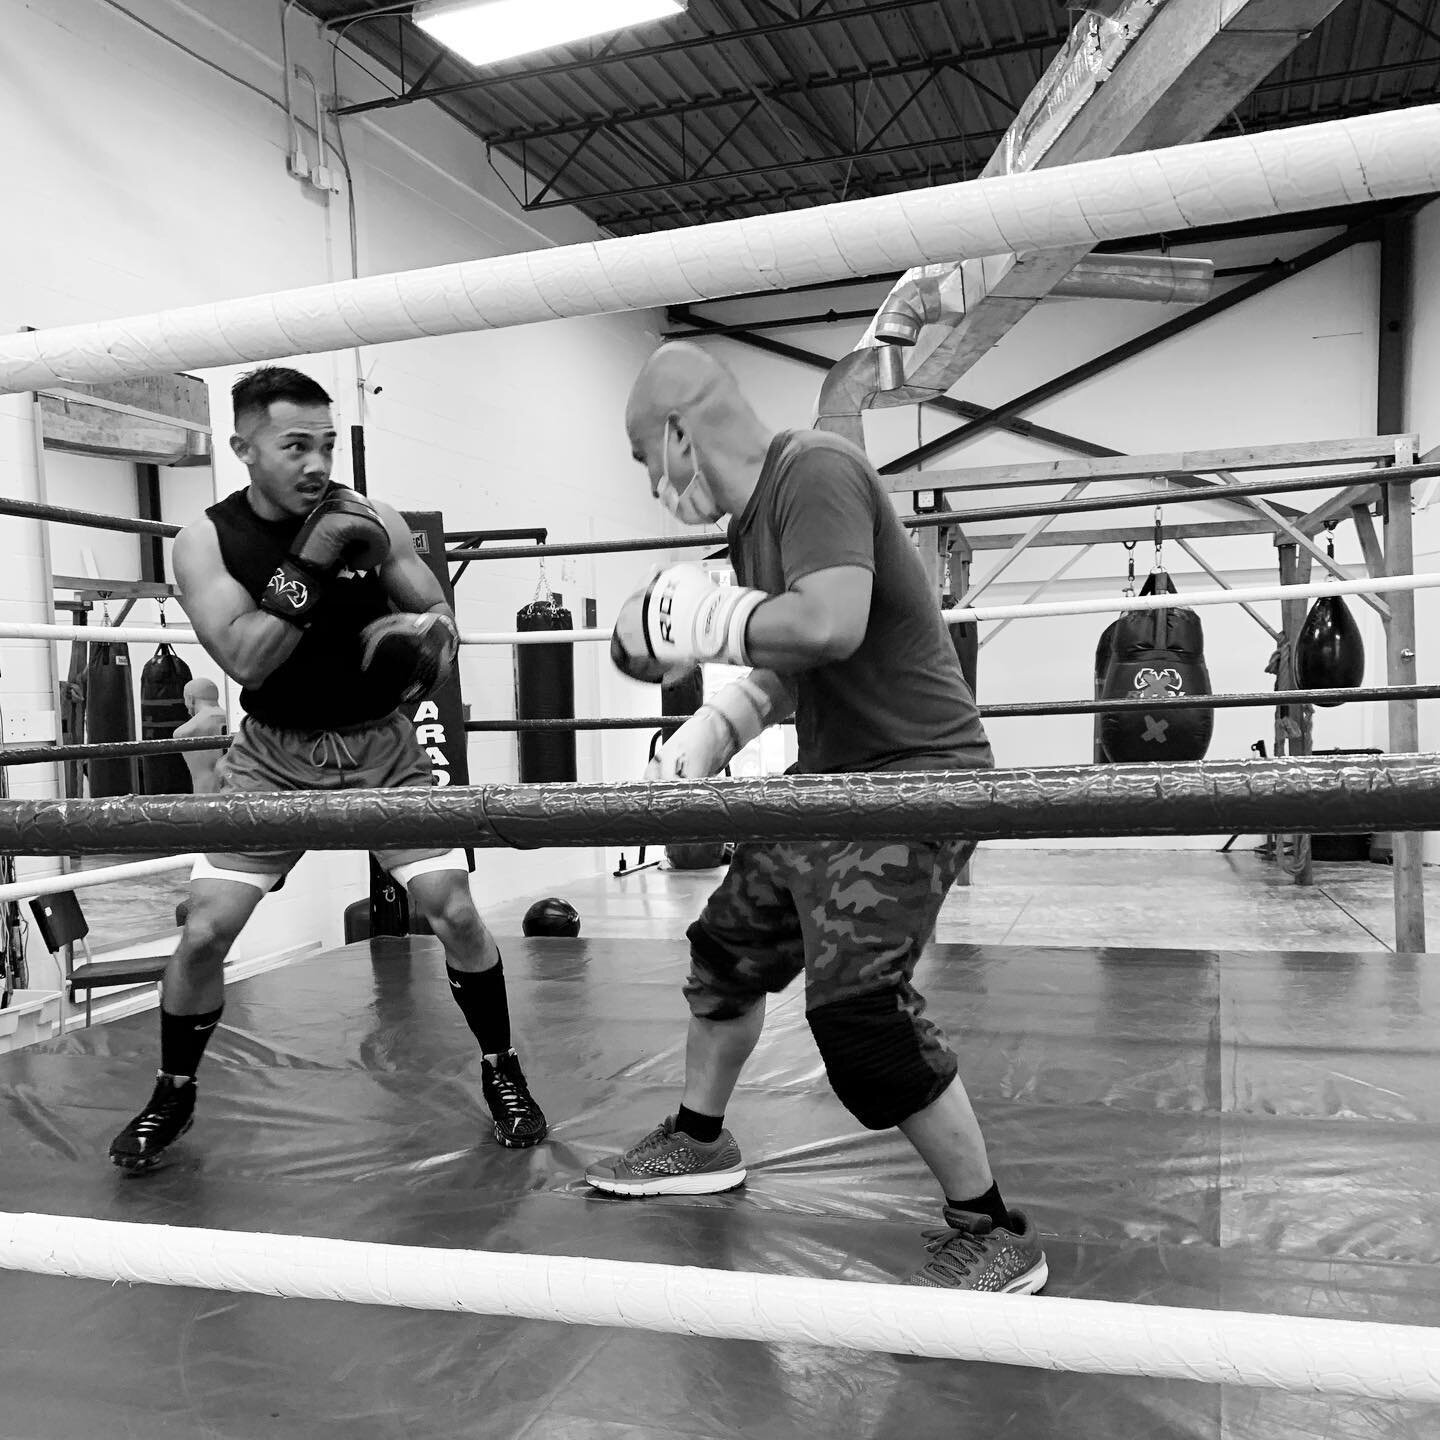 Half way through the week, are you staying on track to achieve your goals? 

Train your mind, body &amp; soul through the sport of boxing 🥊 

#raincityboxing #midweekmotivation #hardworkpaysoff #boxingworkout #boxingworld #boxer #fighter #mindbodyso